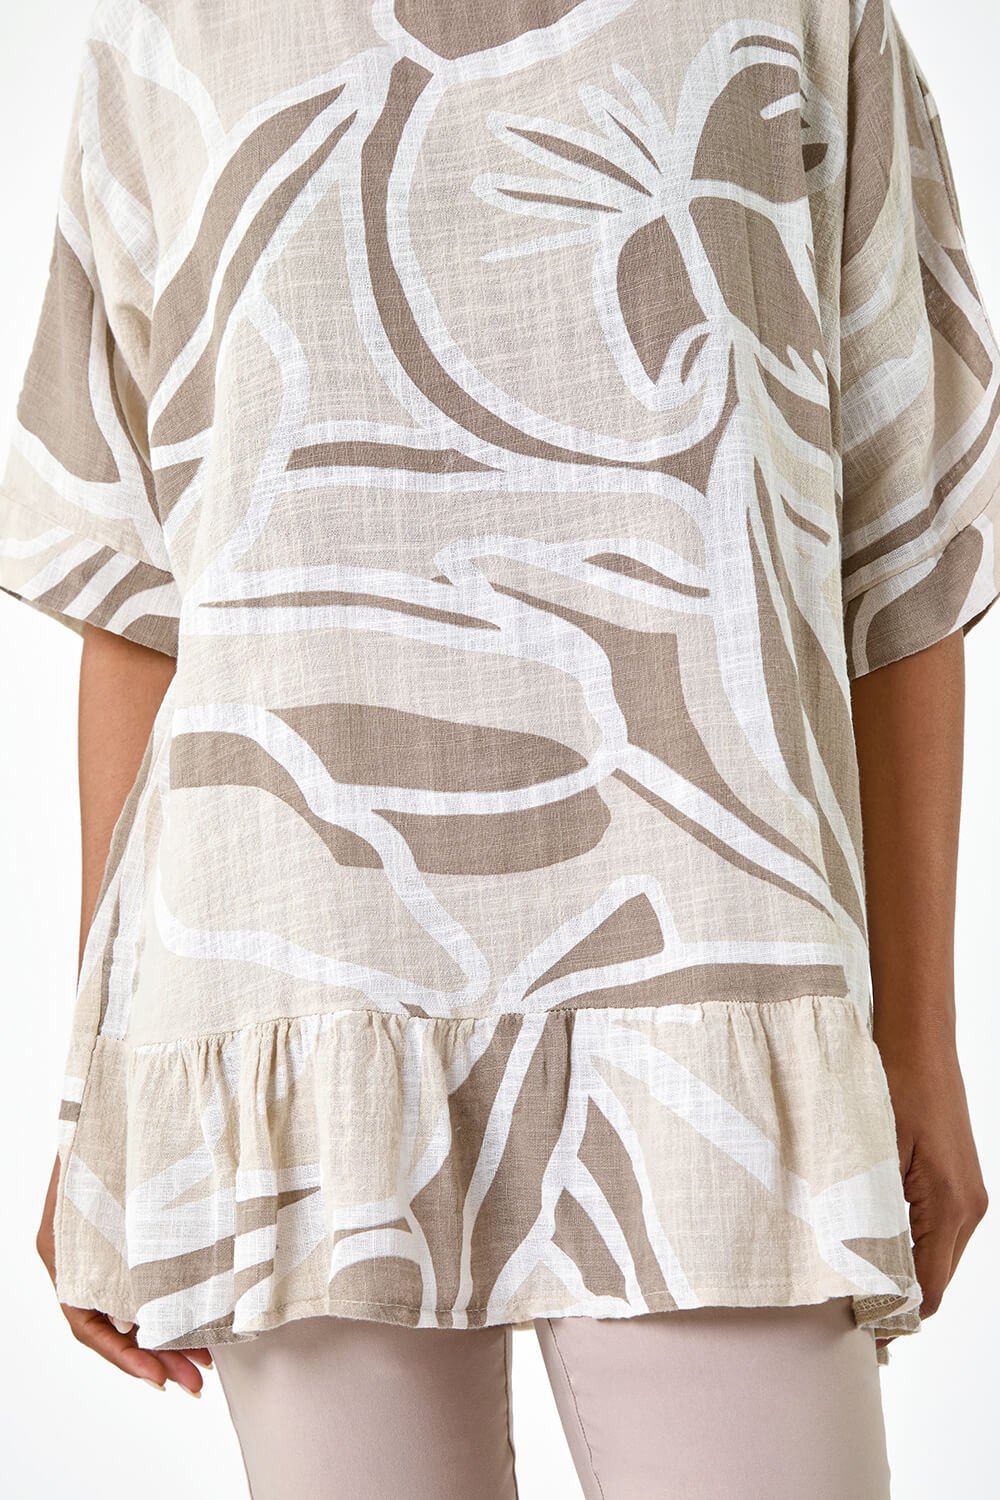 Taupe Cotton Oversized Leaf Tunic Top, Image 5 of 5